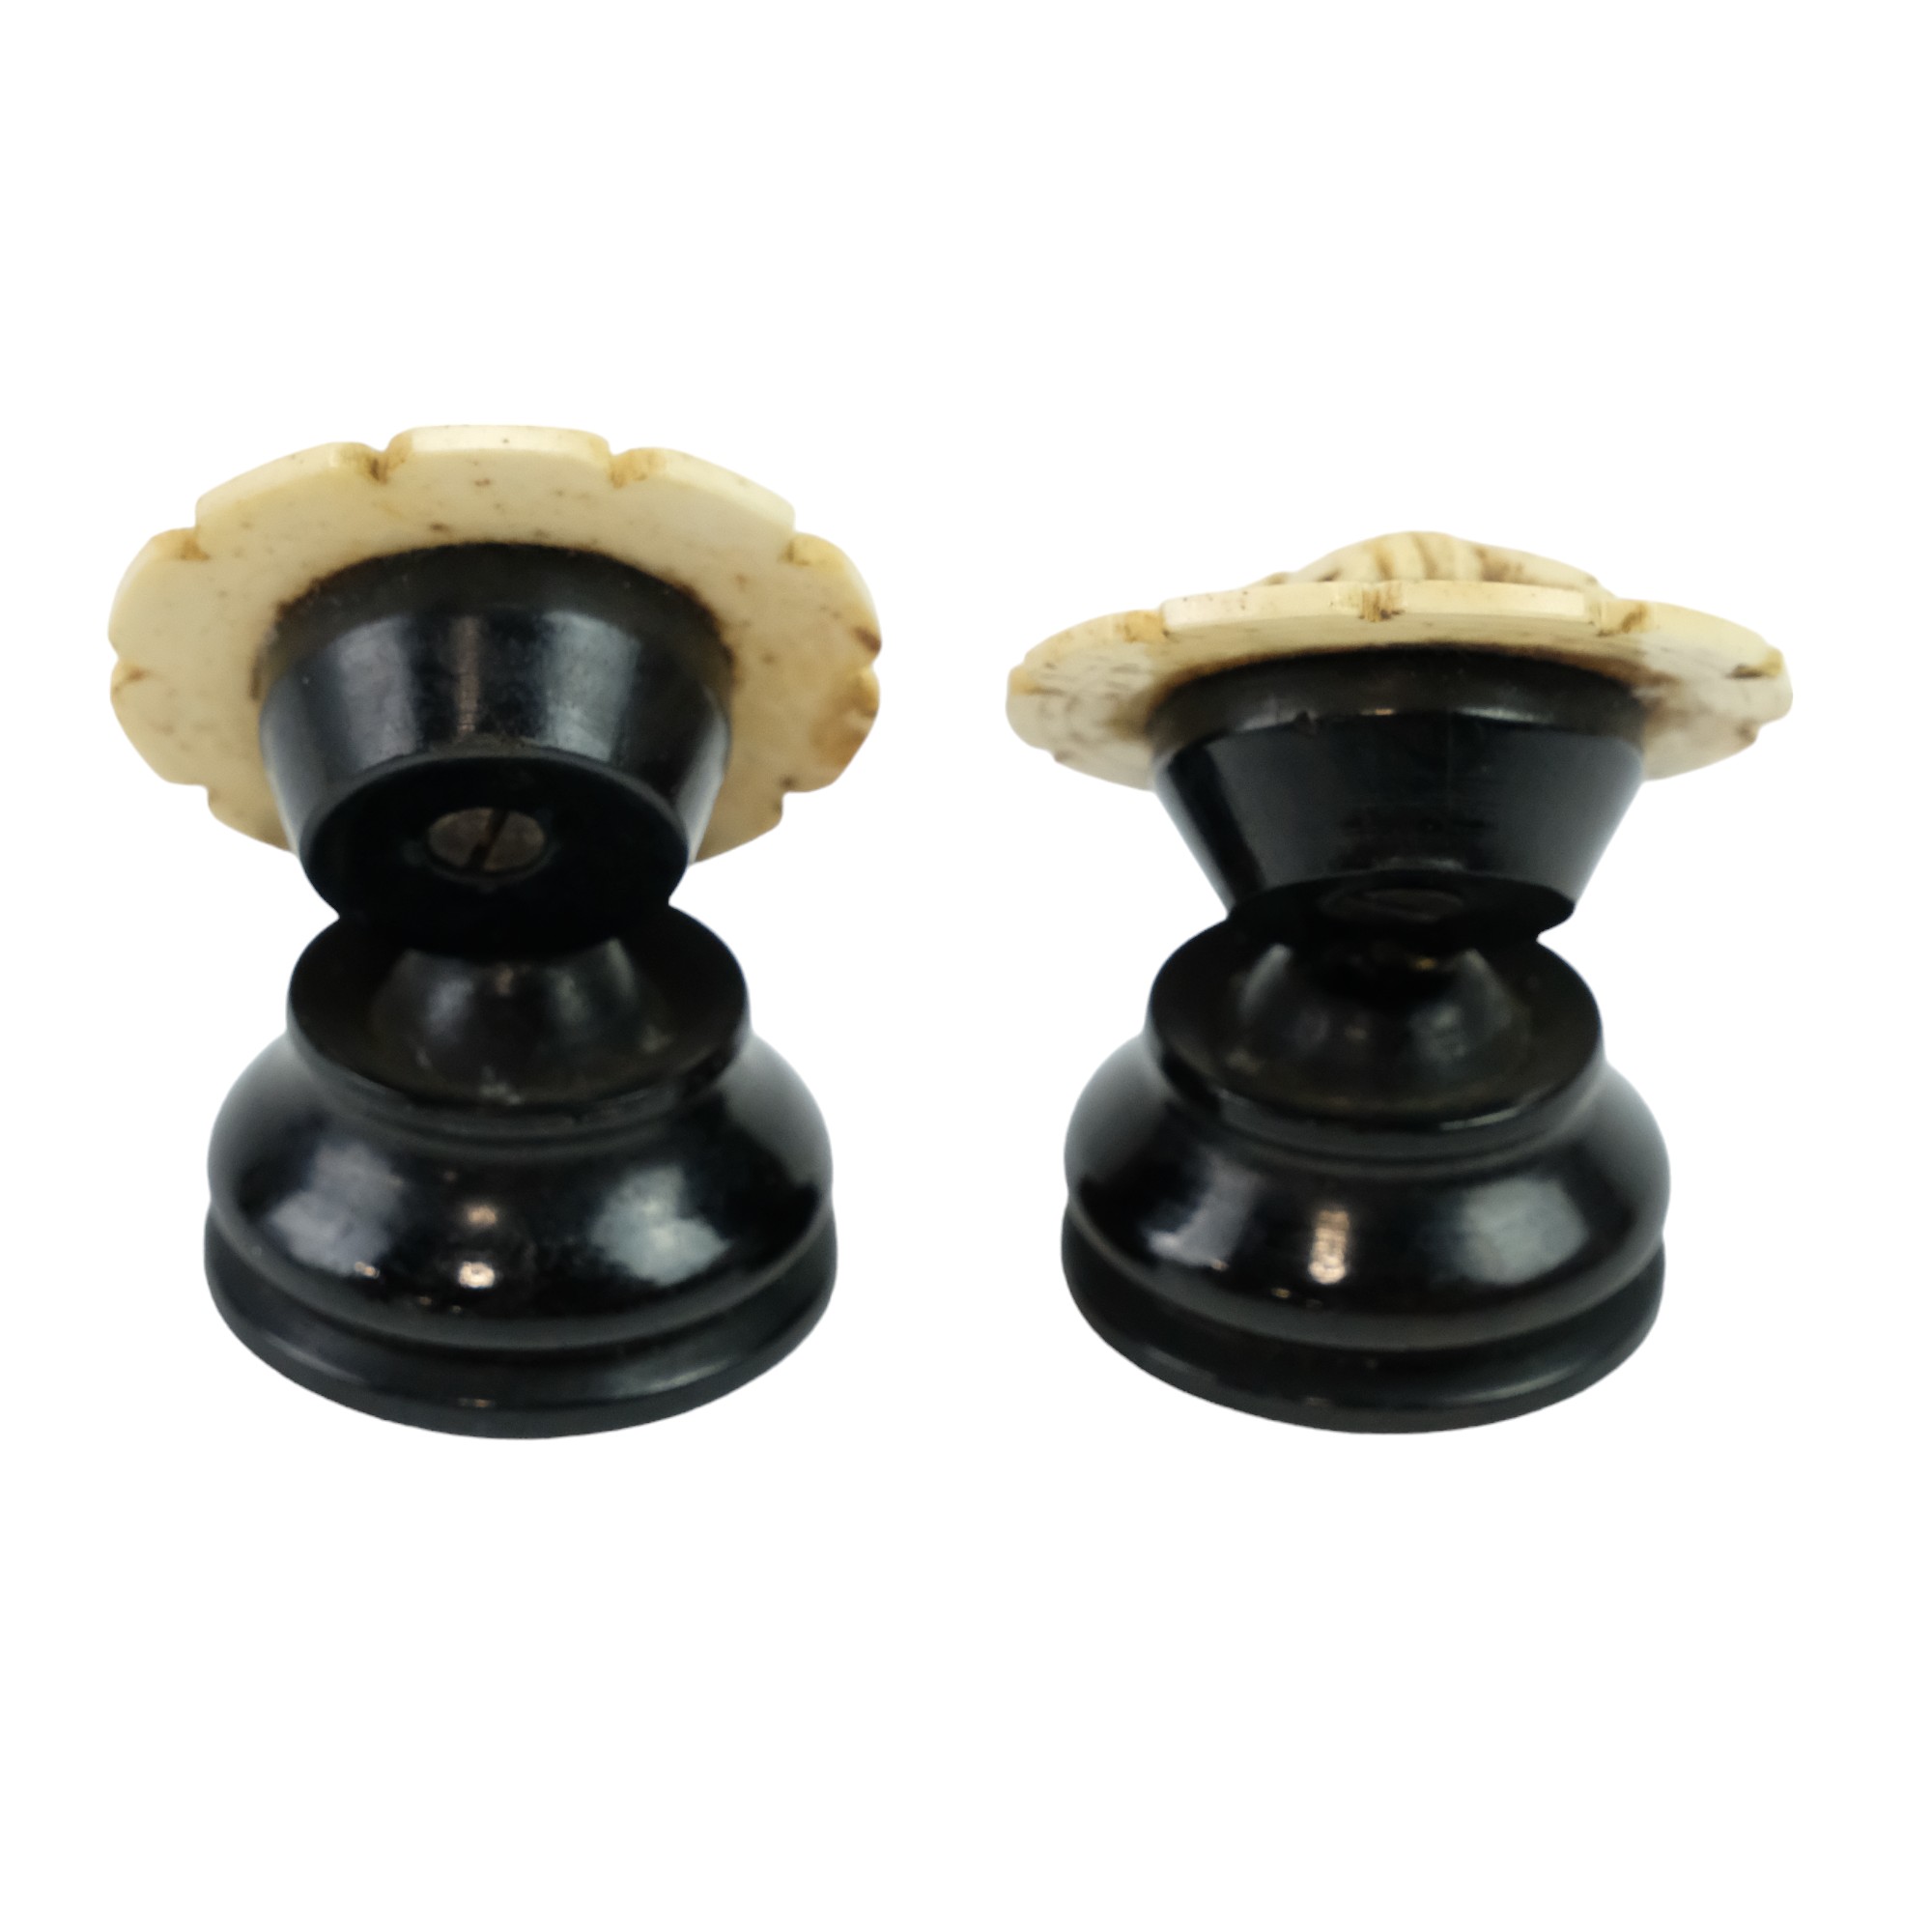 A pair of Victorian bone and ebony game score counters, 5 cm - Image 2 of 2